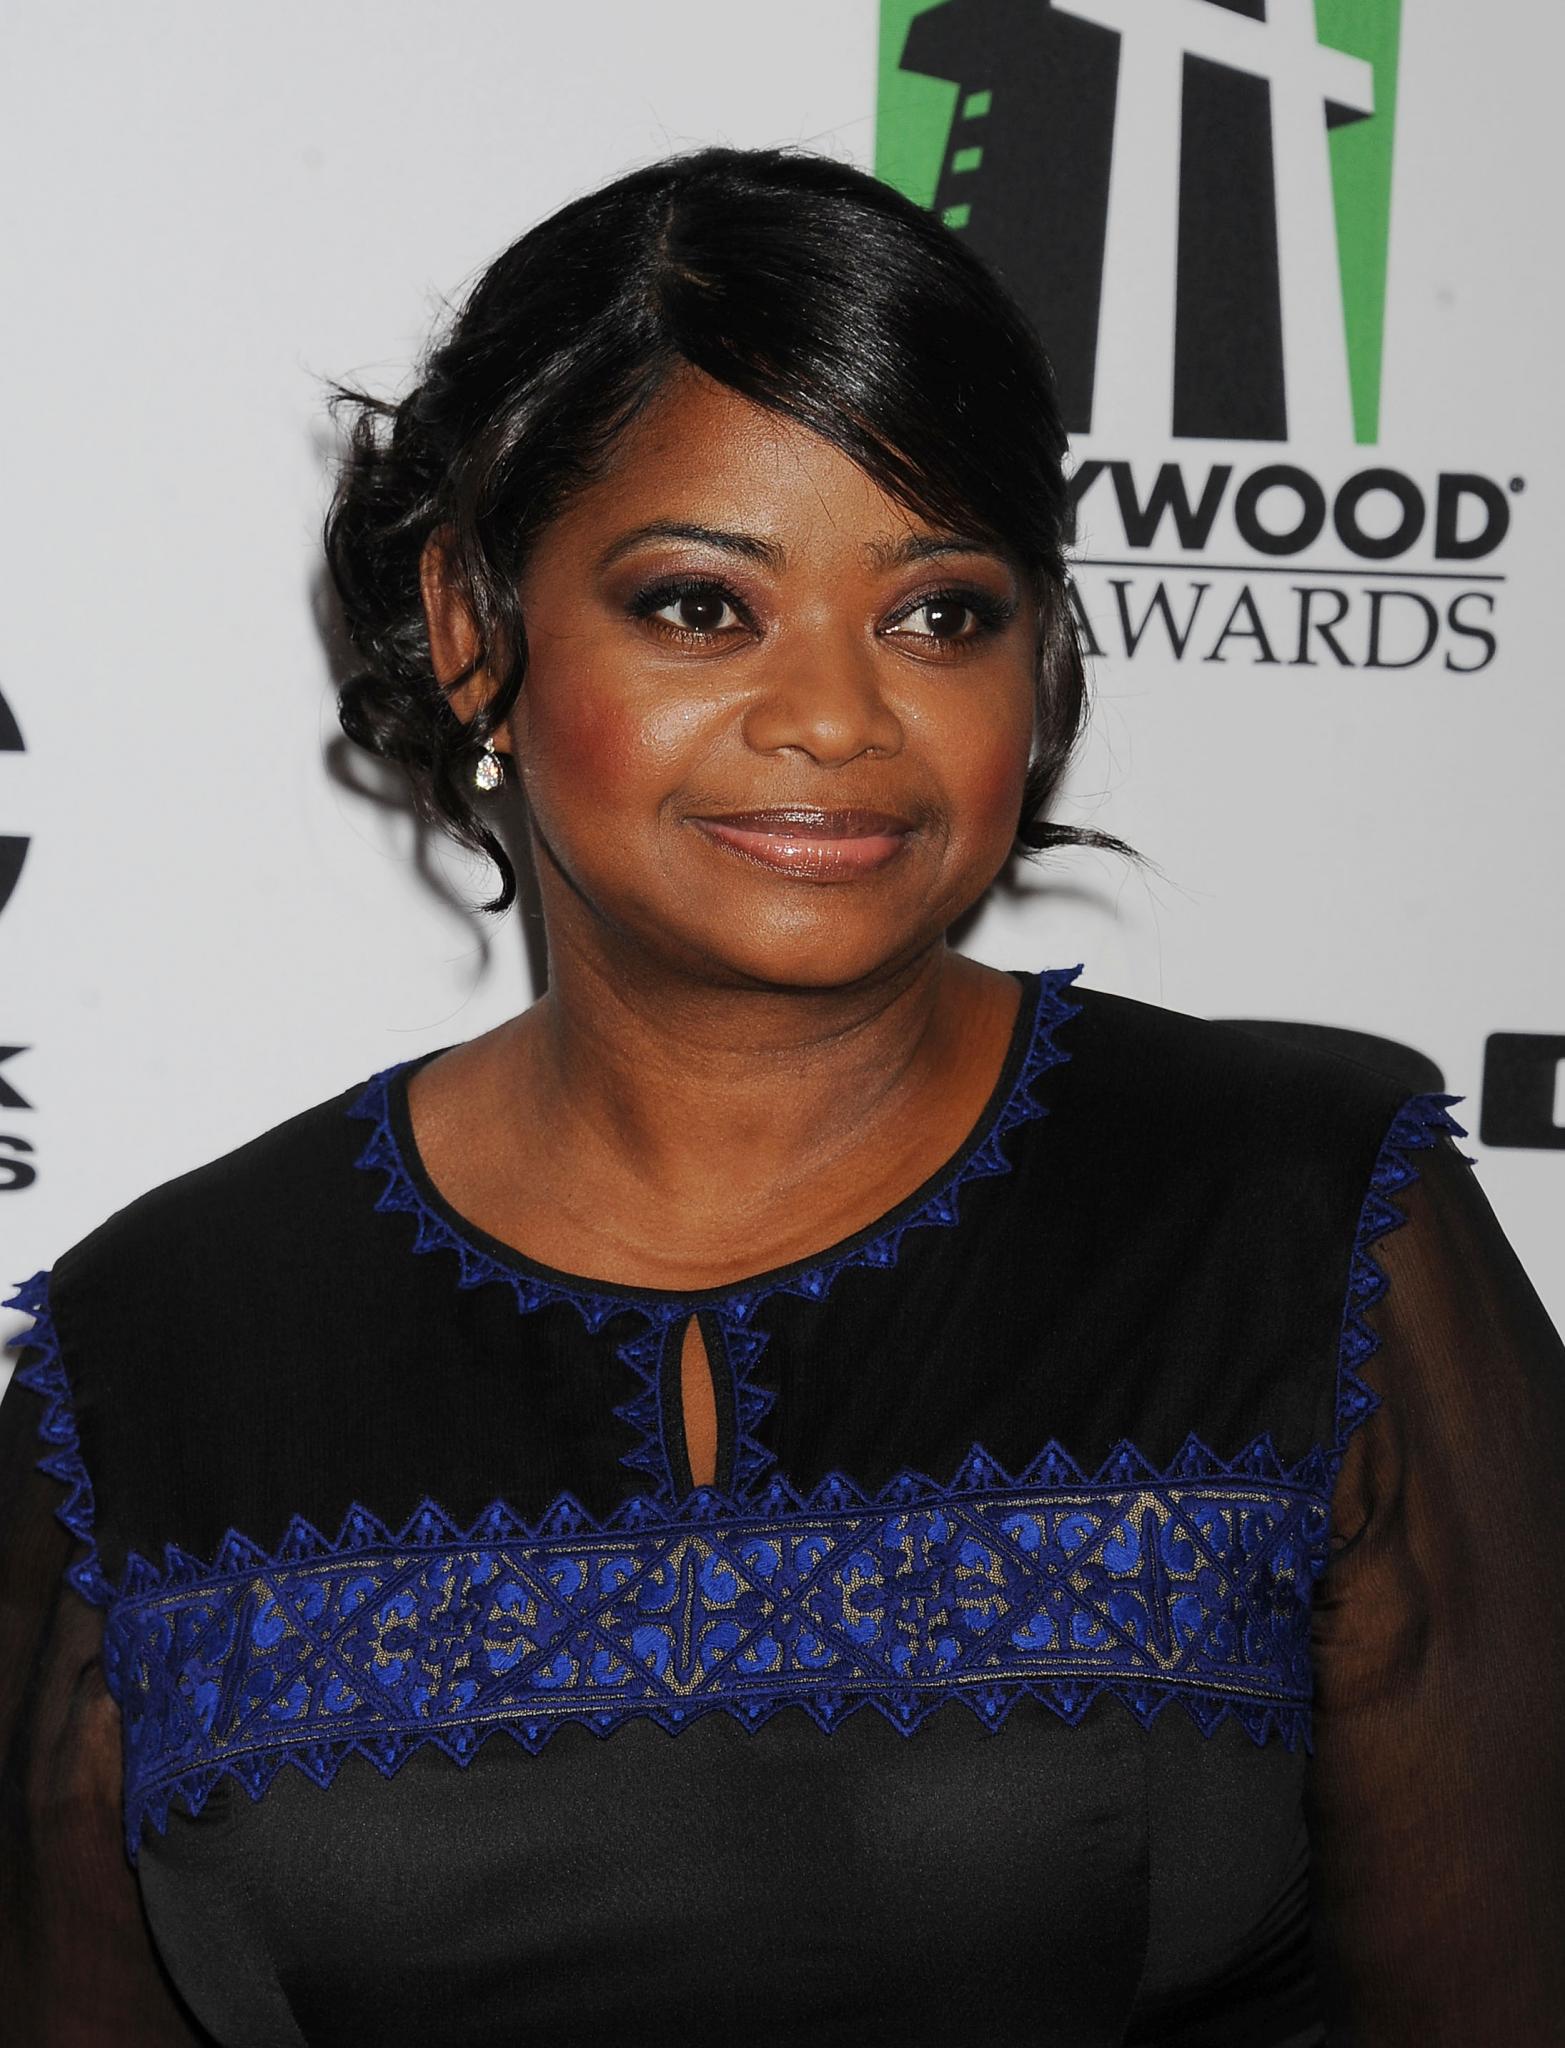 NBC Cancels 'Murder, She Wrote' Reboot with Octavia Spencer